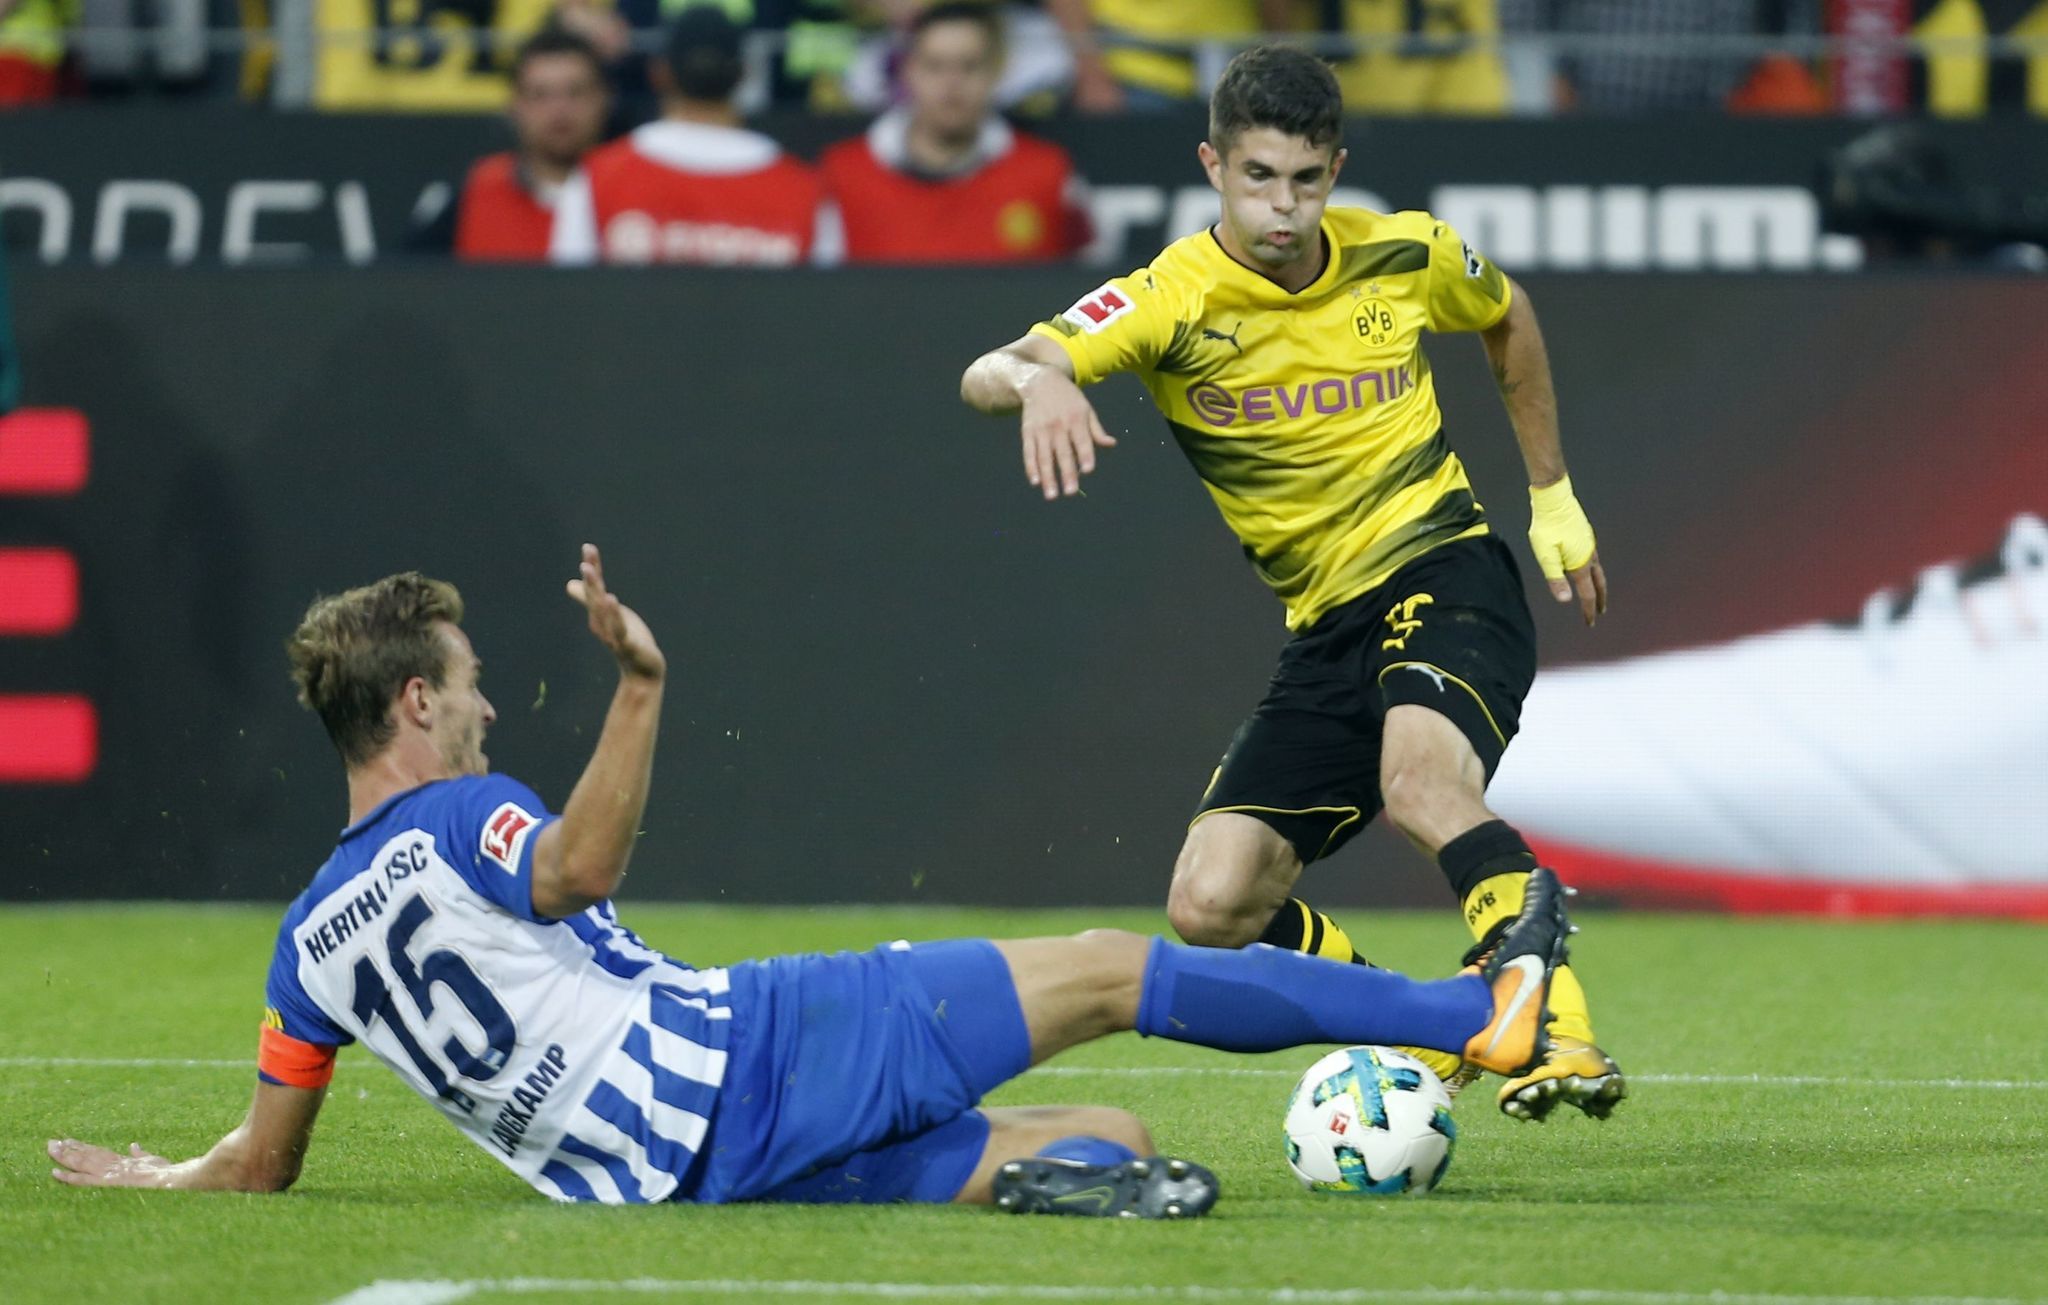 At 18, Christian Pulisic is becoming the player of U.S. soccer dreams